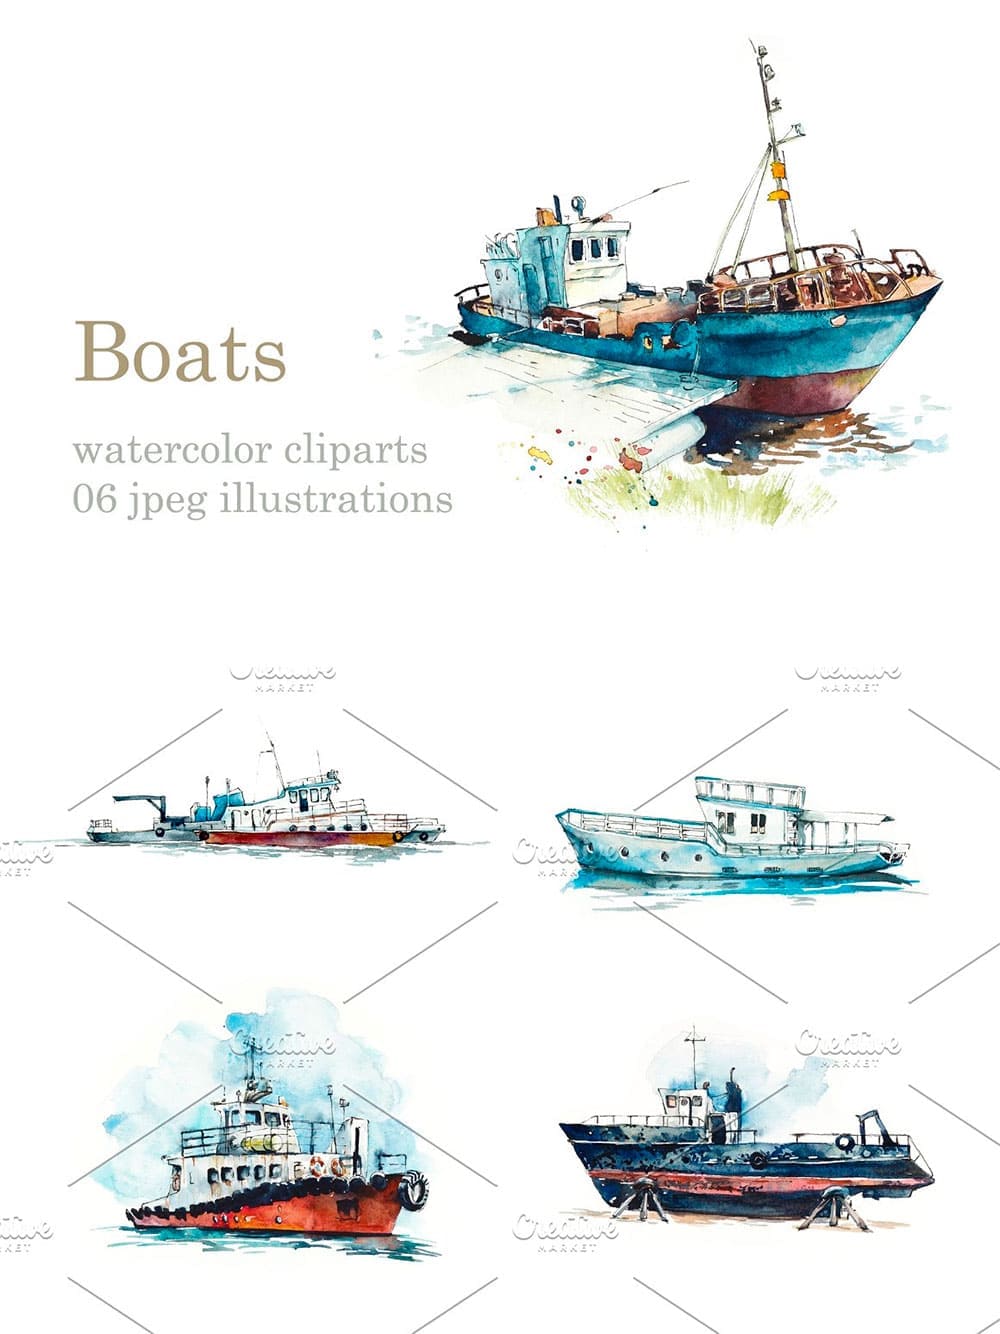 Watercolor boats, picture for pinterest.